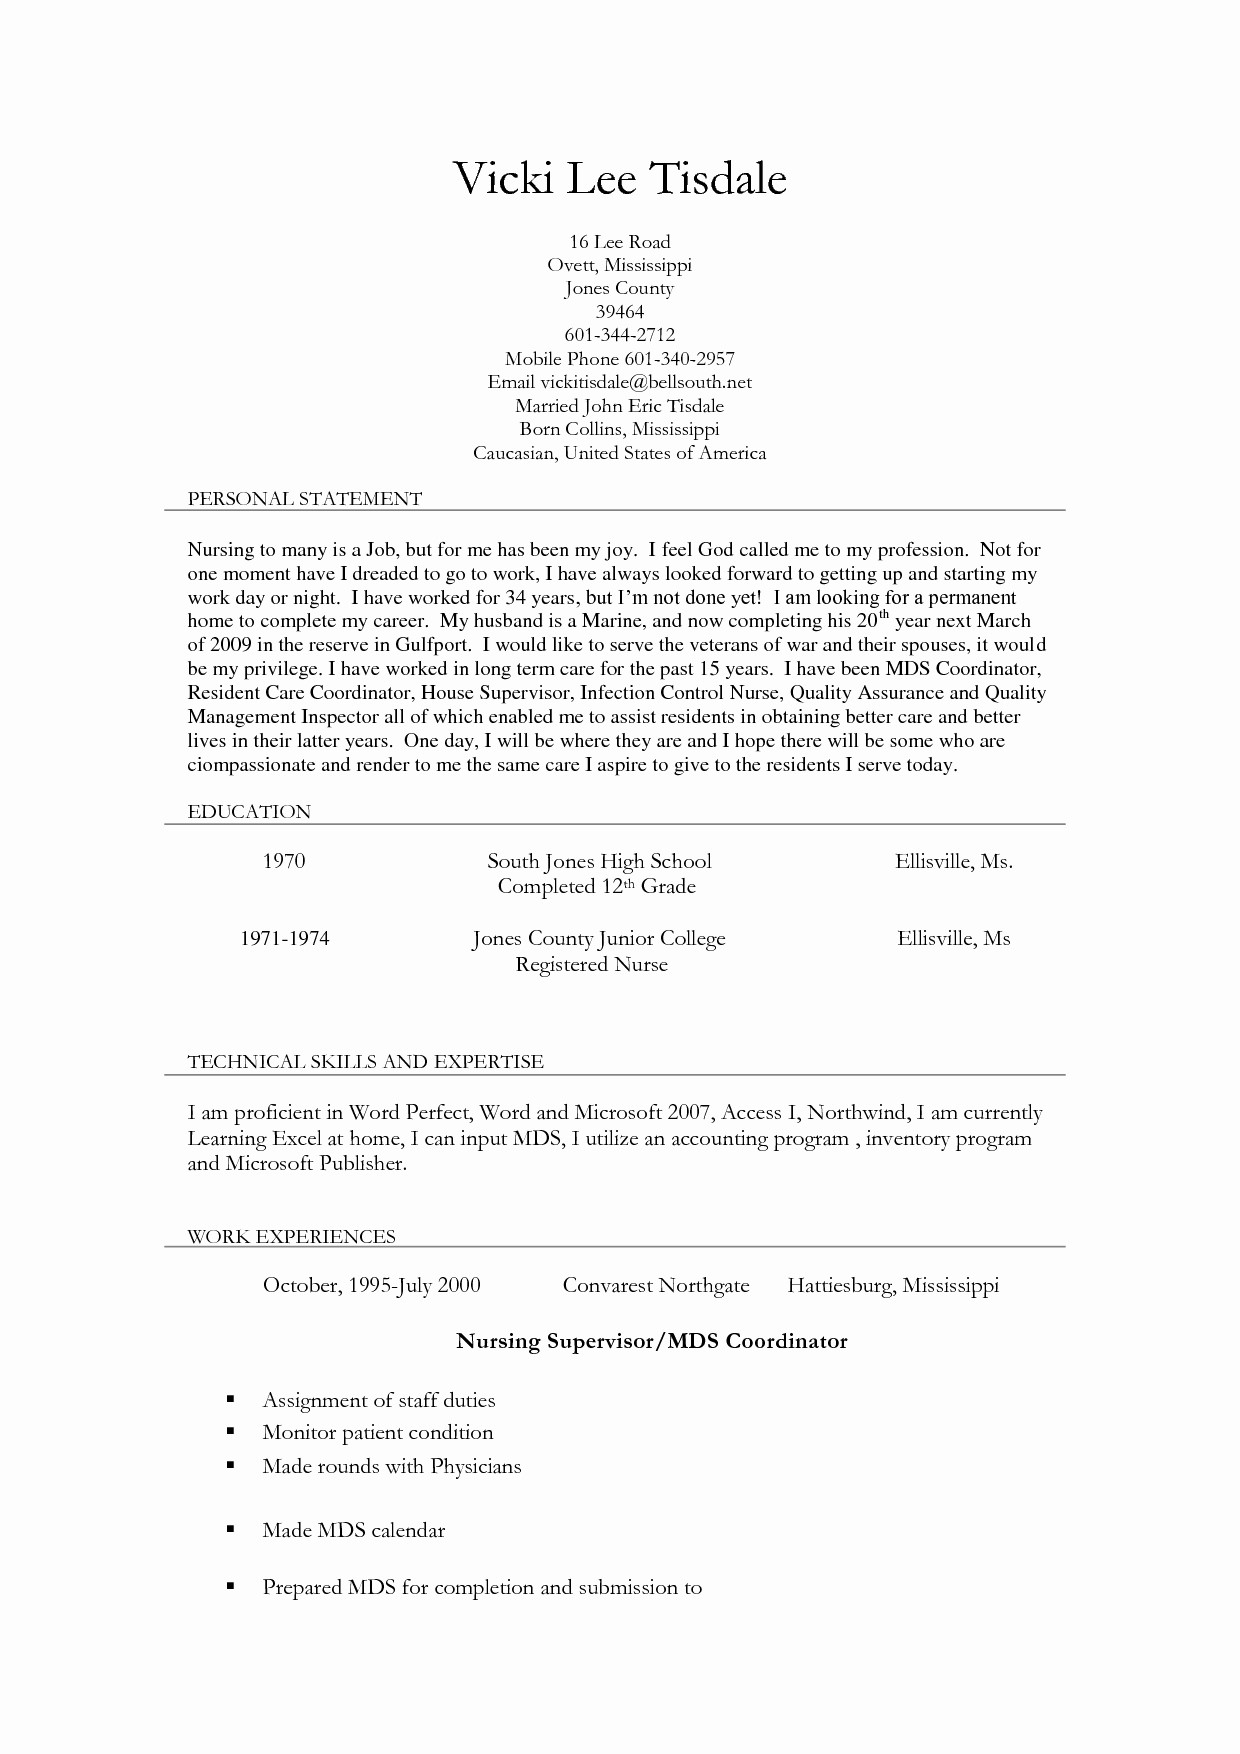 Wordperfect Spreadsheet Regarding Resume Template For Stay At Home Mom List Of Wordperfect Spreadsheet